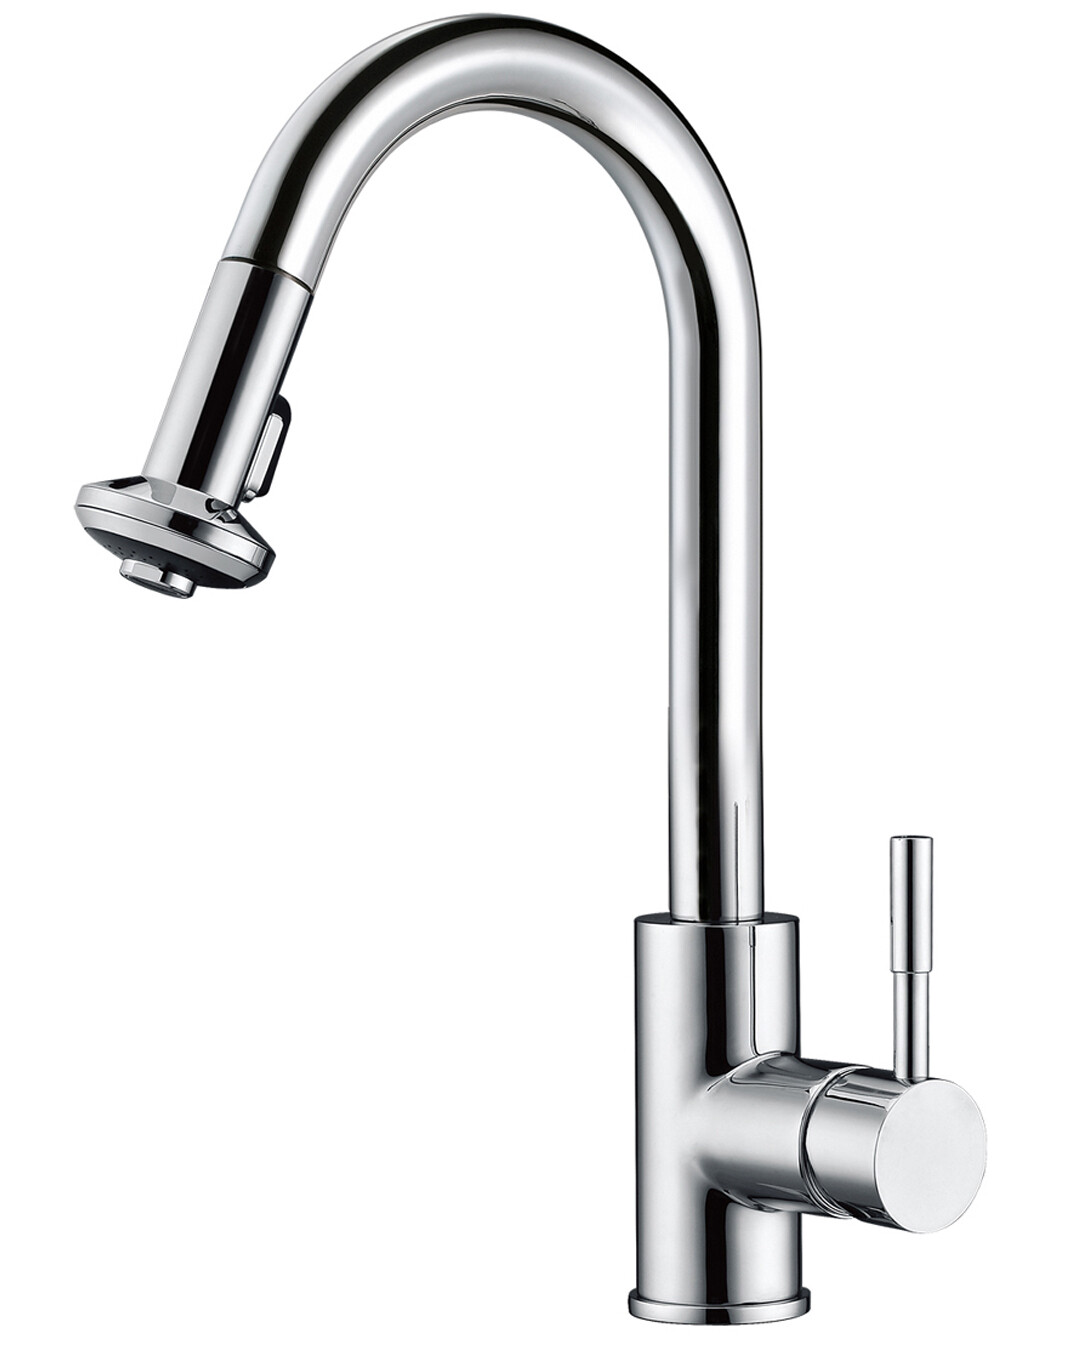 Single-lever pull-out spray sink mixer